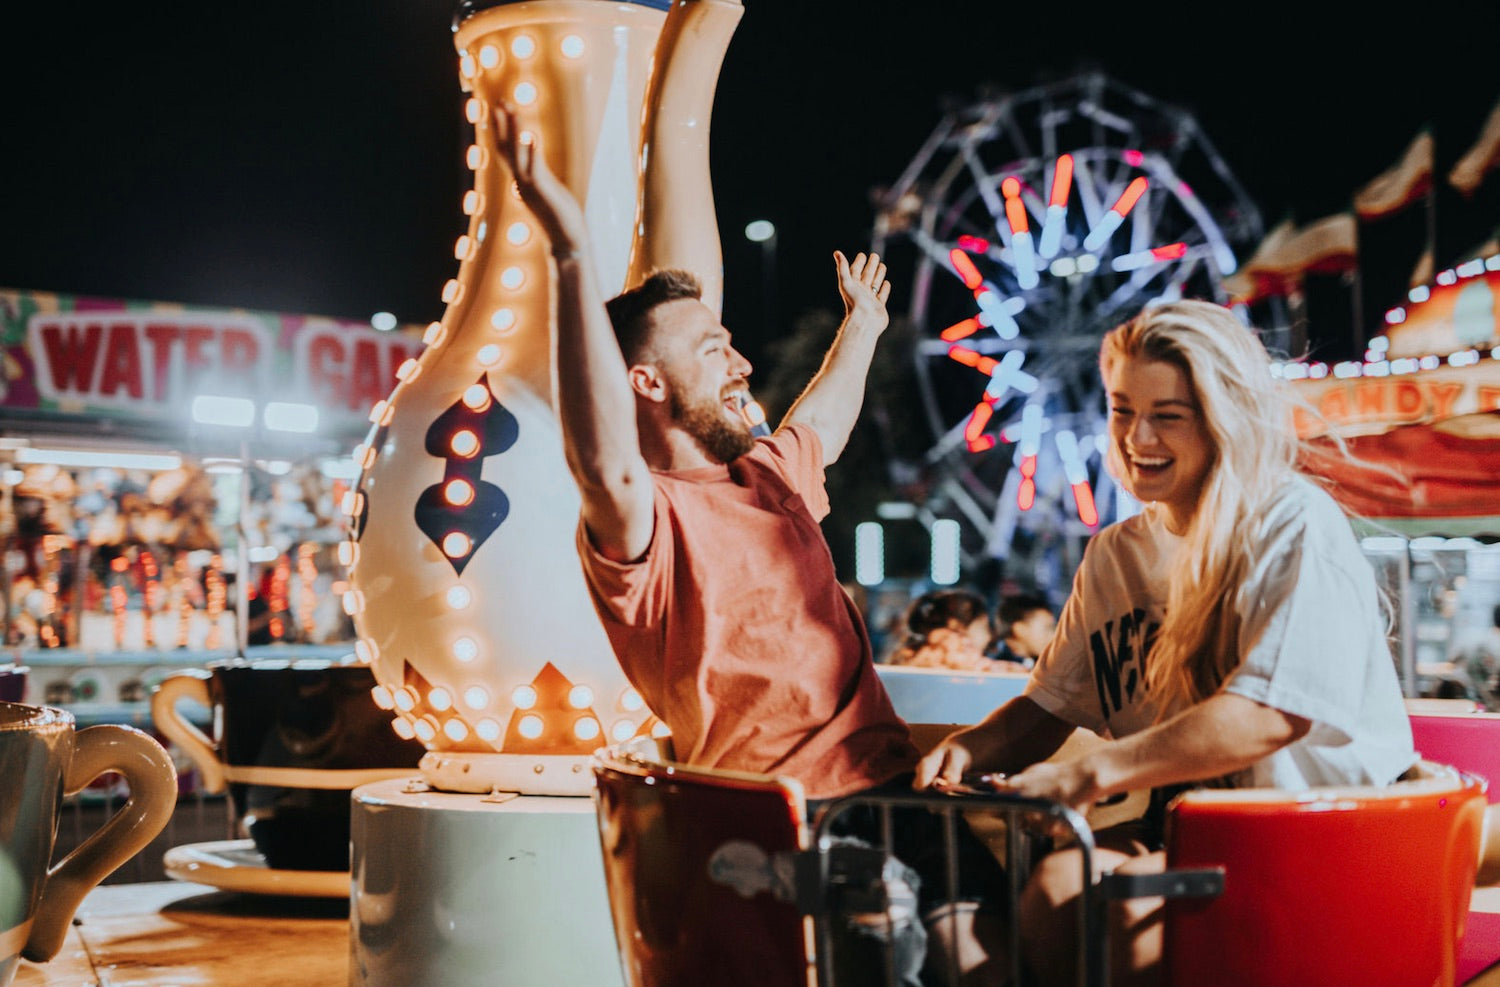 55 Cheap Date Ideas That Are Fun And Create Connection. Couple enjoying their time together on a teacup ride at the amusement park.